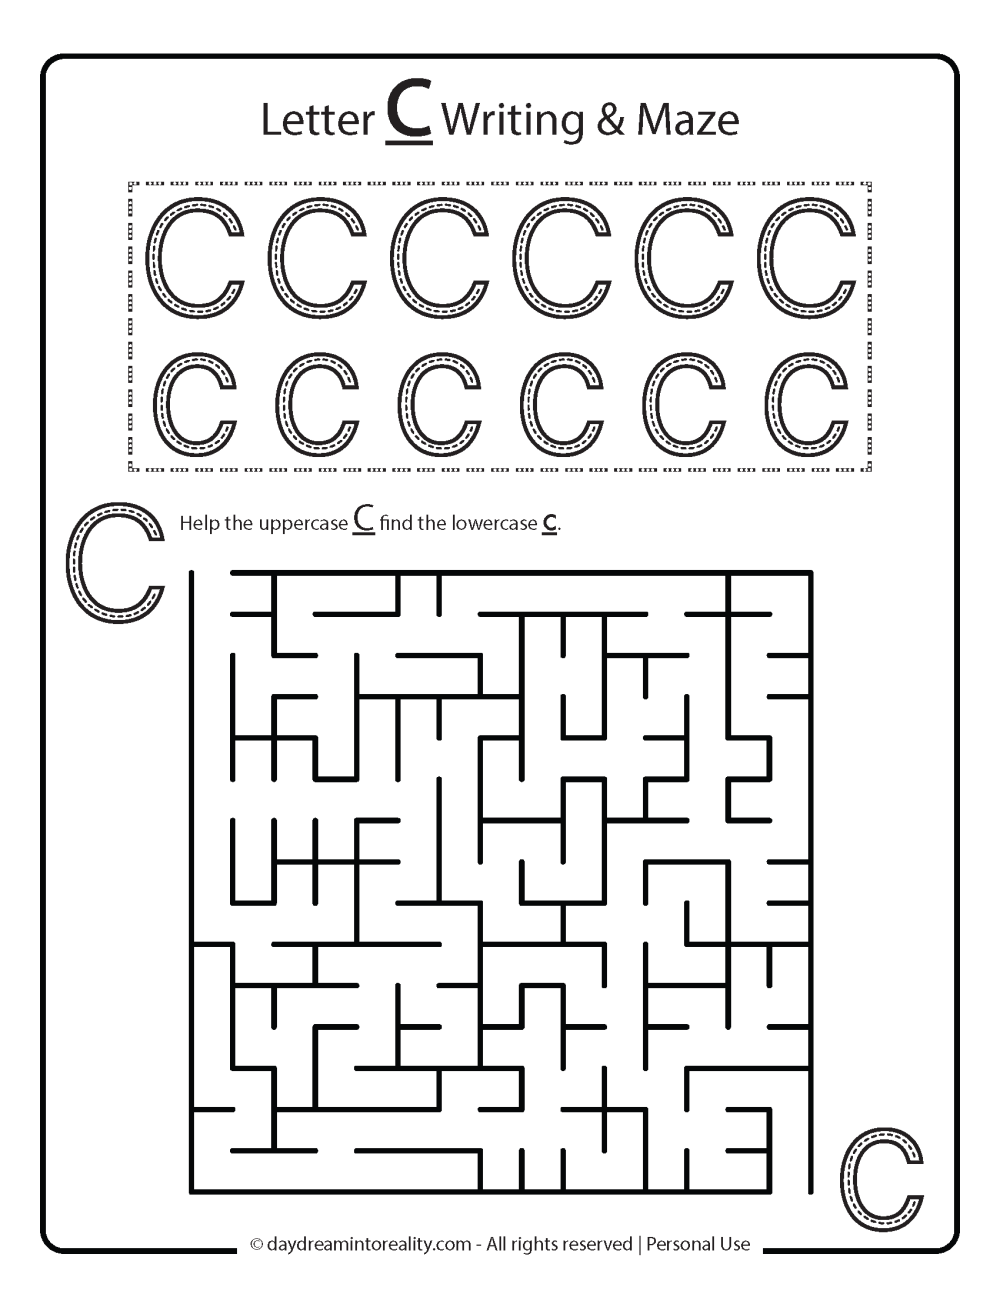 Letter C writing practice and maze